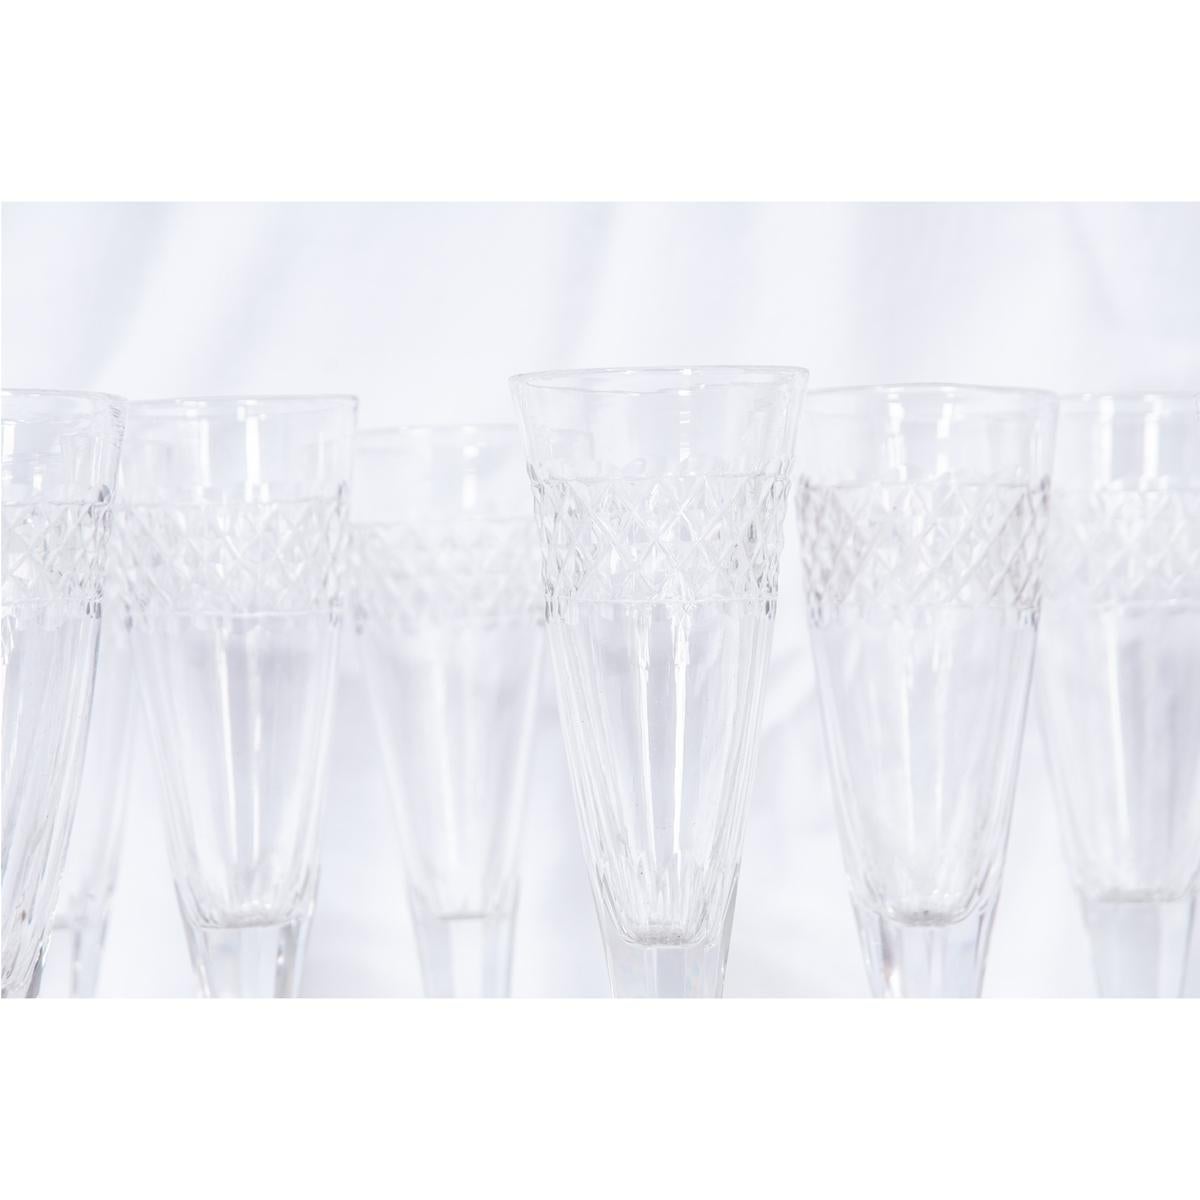 Set of 13 French glasses, circa 1820. These crystal flutes have a cut design around the bowl and overall tapered design with faceted stems.